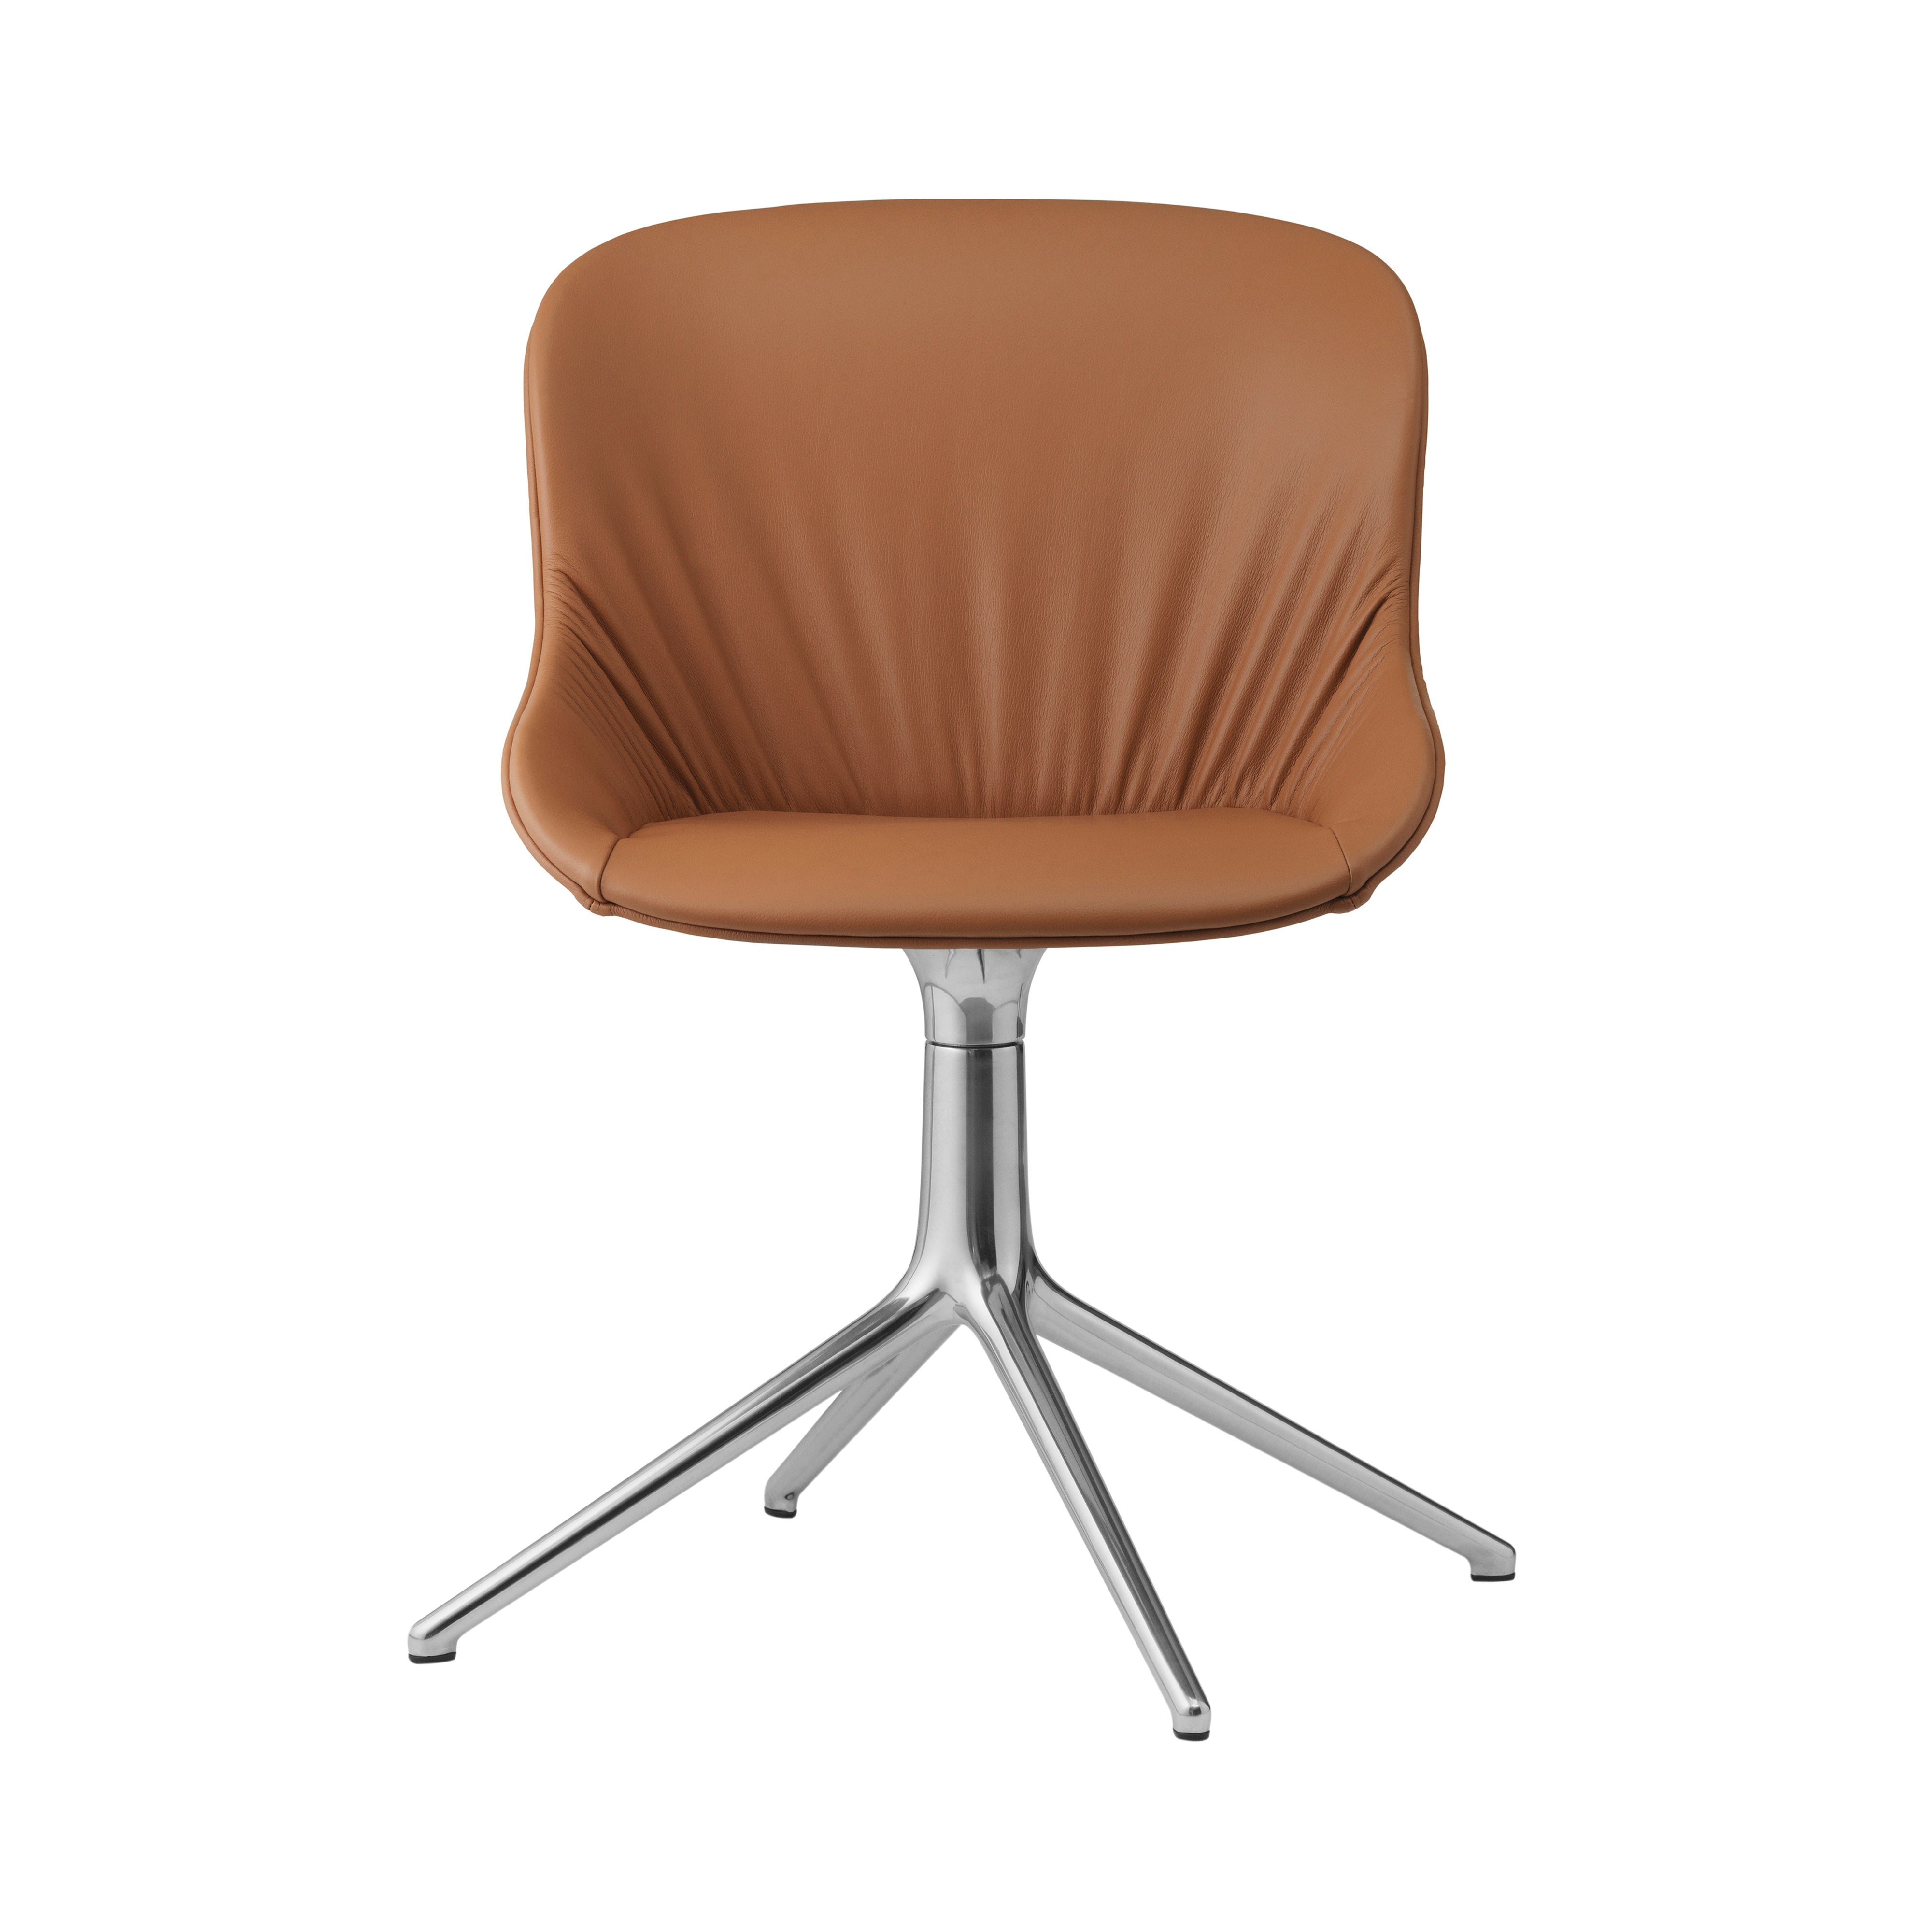 Hyg 4 Legs Comfort Chair: Swivel Base + Full Upholstered + Aluminum + Without Casters